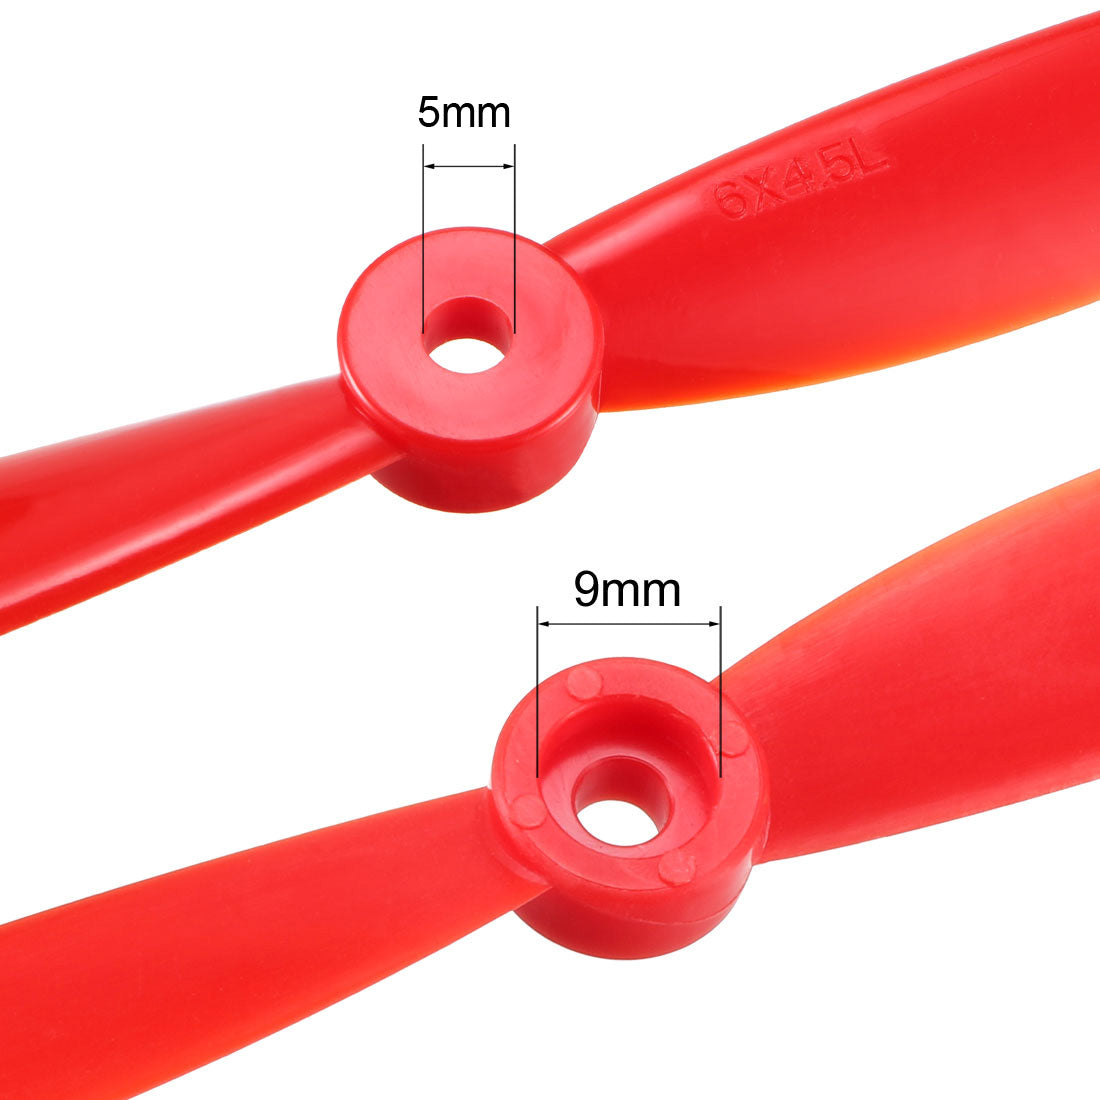 uxcell Uxcell RC Propellers  C 6045 6x4.5 Inch 2-Vane Quadcopter for Airplane Toy, Nylon Red 2 Pairs with Adapter Rings